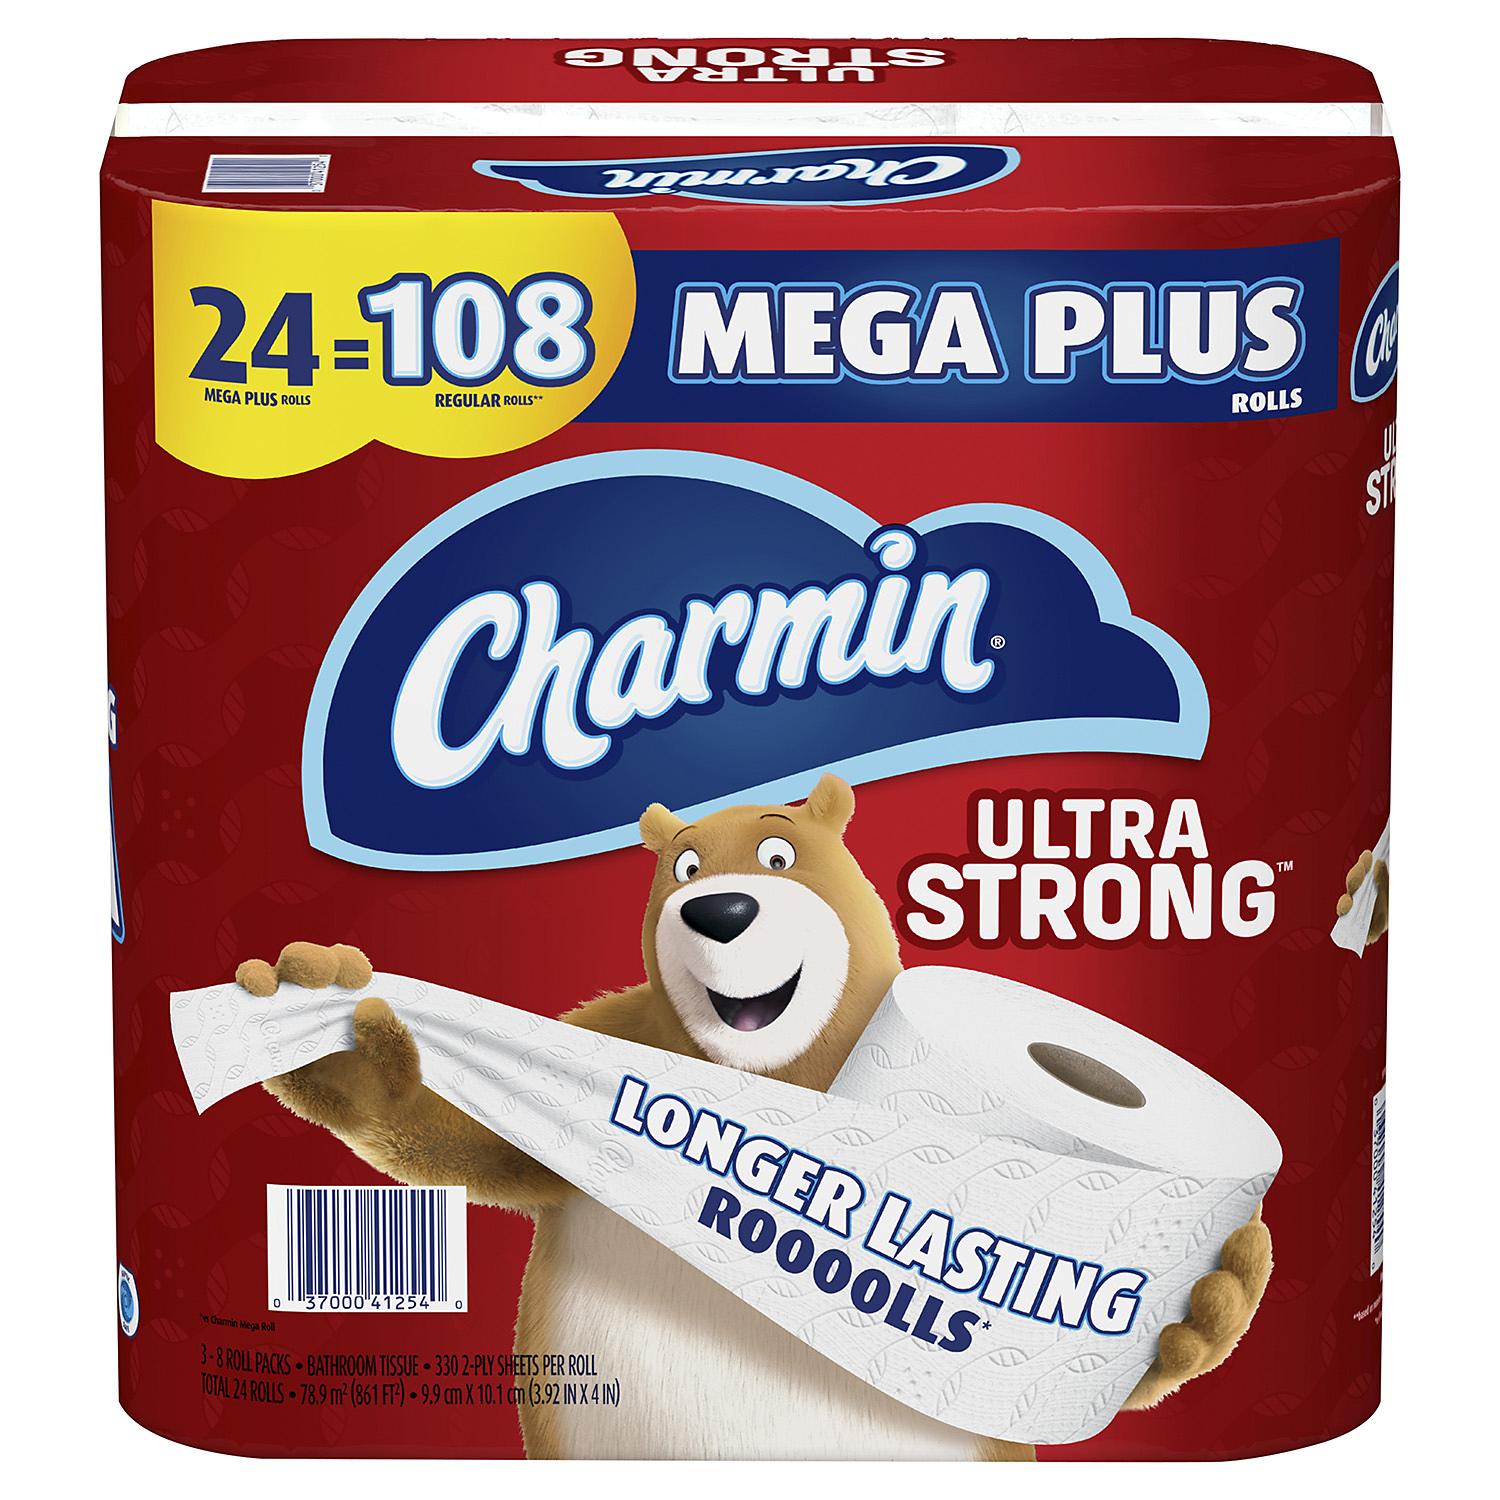 Charmin [Red Wrapper] Ultra Strong Toilet Paper Mega Plus Roll, 308 Sheets, 24 Ct, 1 Case